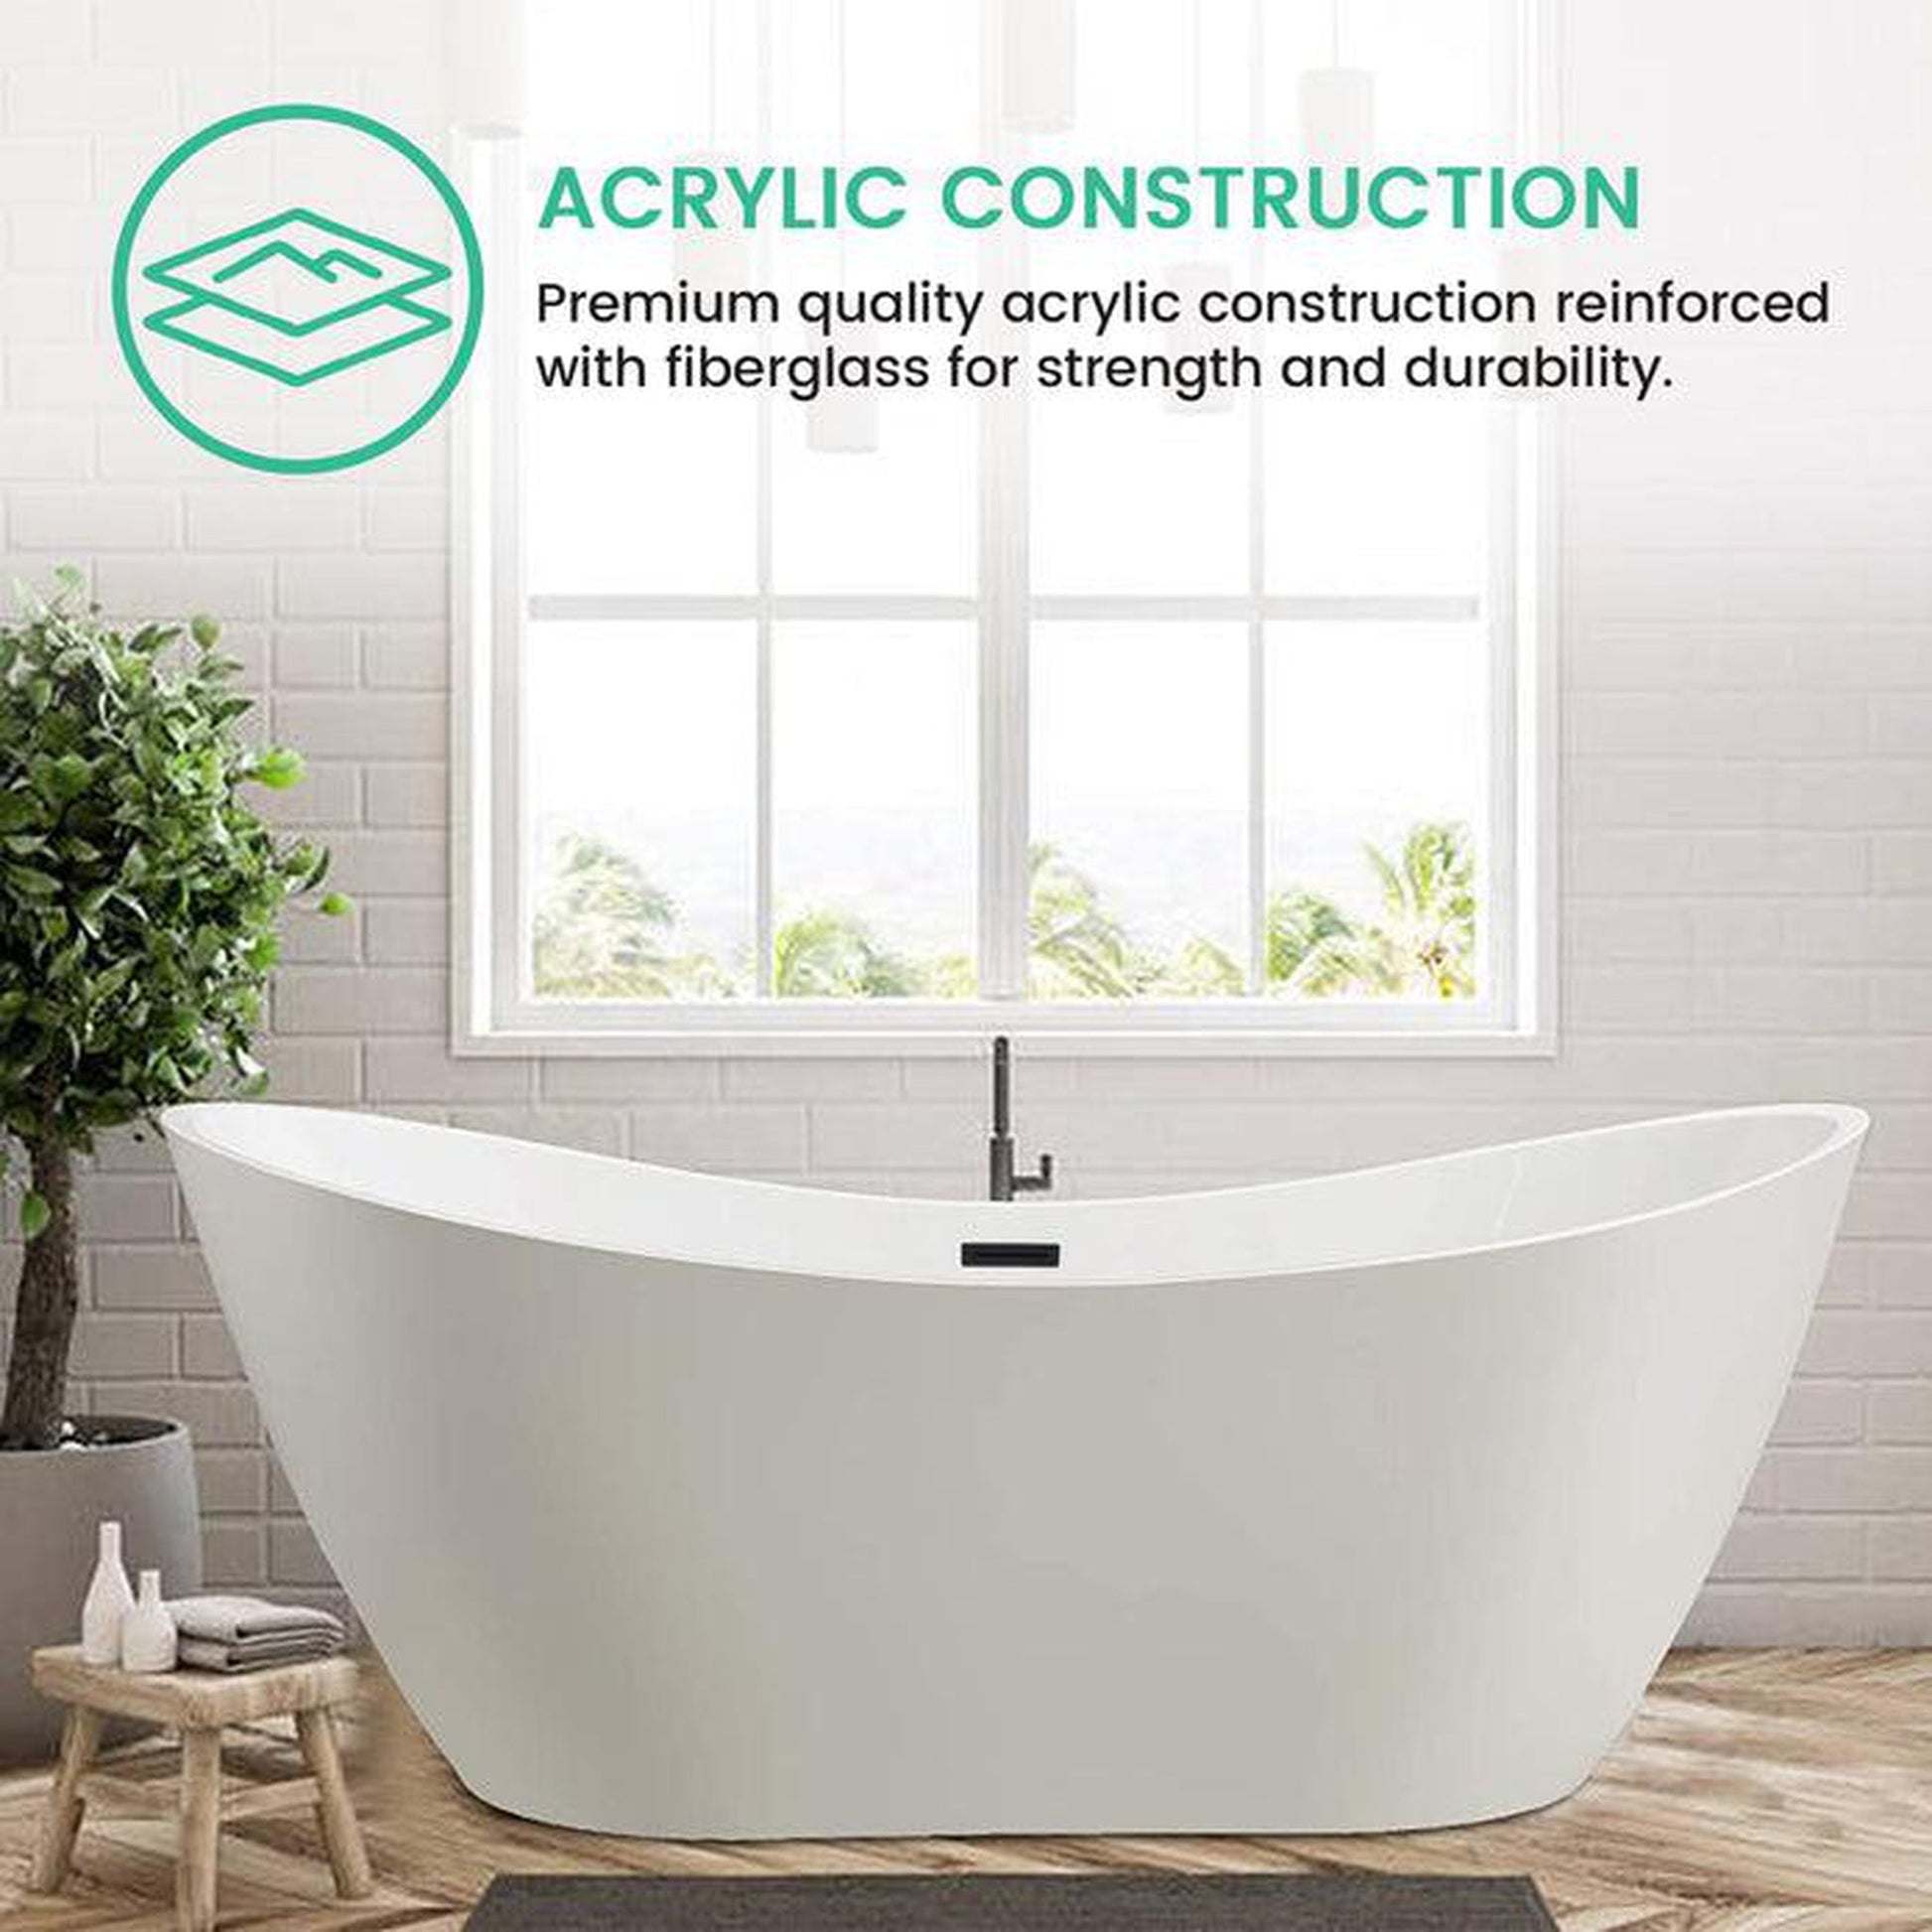 Vanity Art 71" W x 28" H White Acrylic Freestanding Bathtub With Oil Rubbed Bronze Pop-up Drain, Slotted Overflow and Flexible Drain Hose